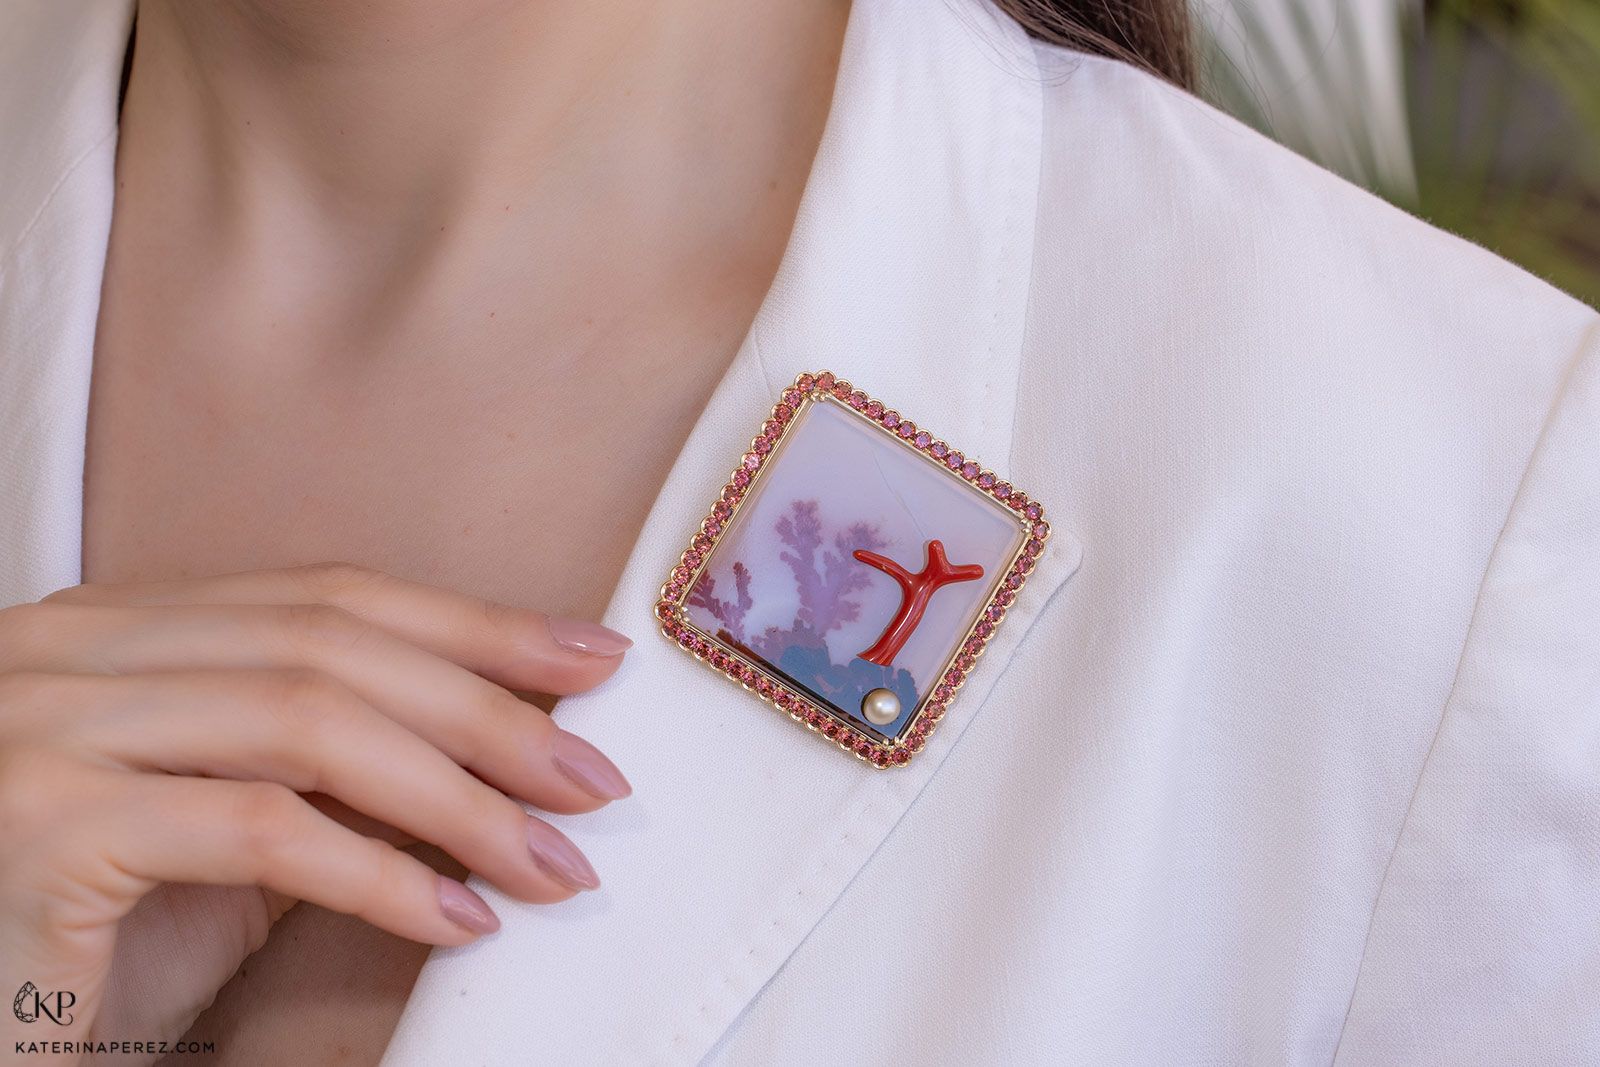 Katerina Perez wears an Assael NatureScapes brooch. Photo by Simon Martner